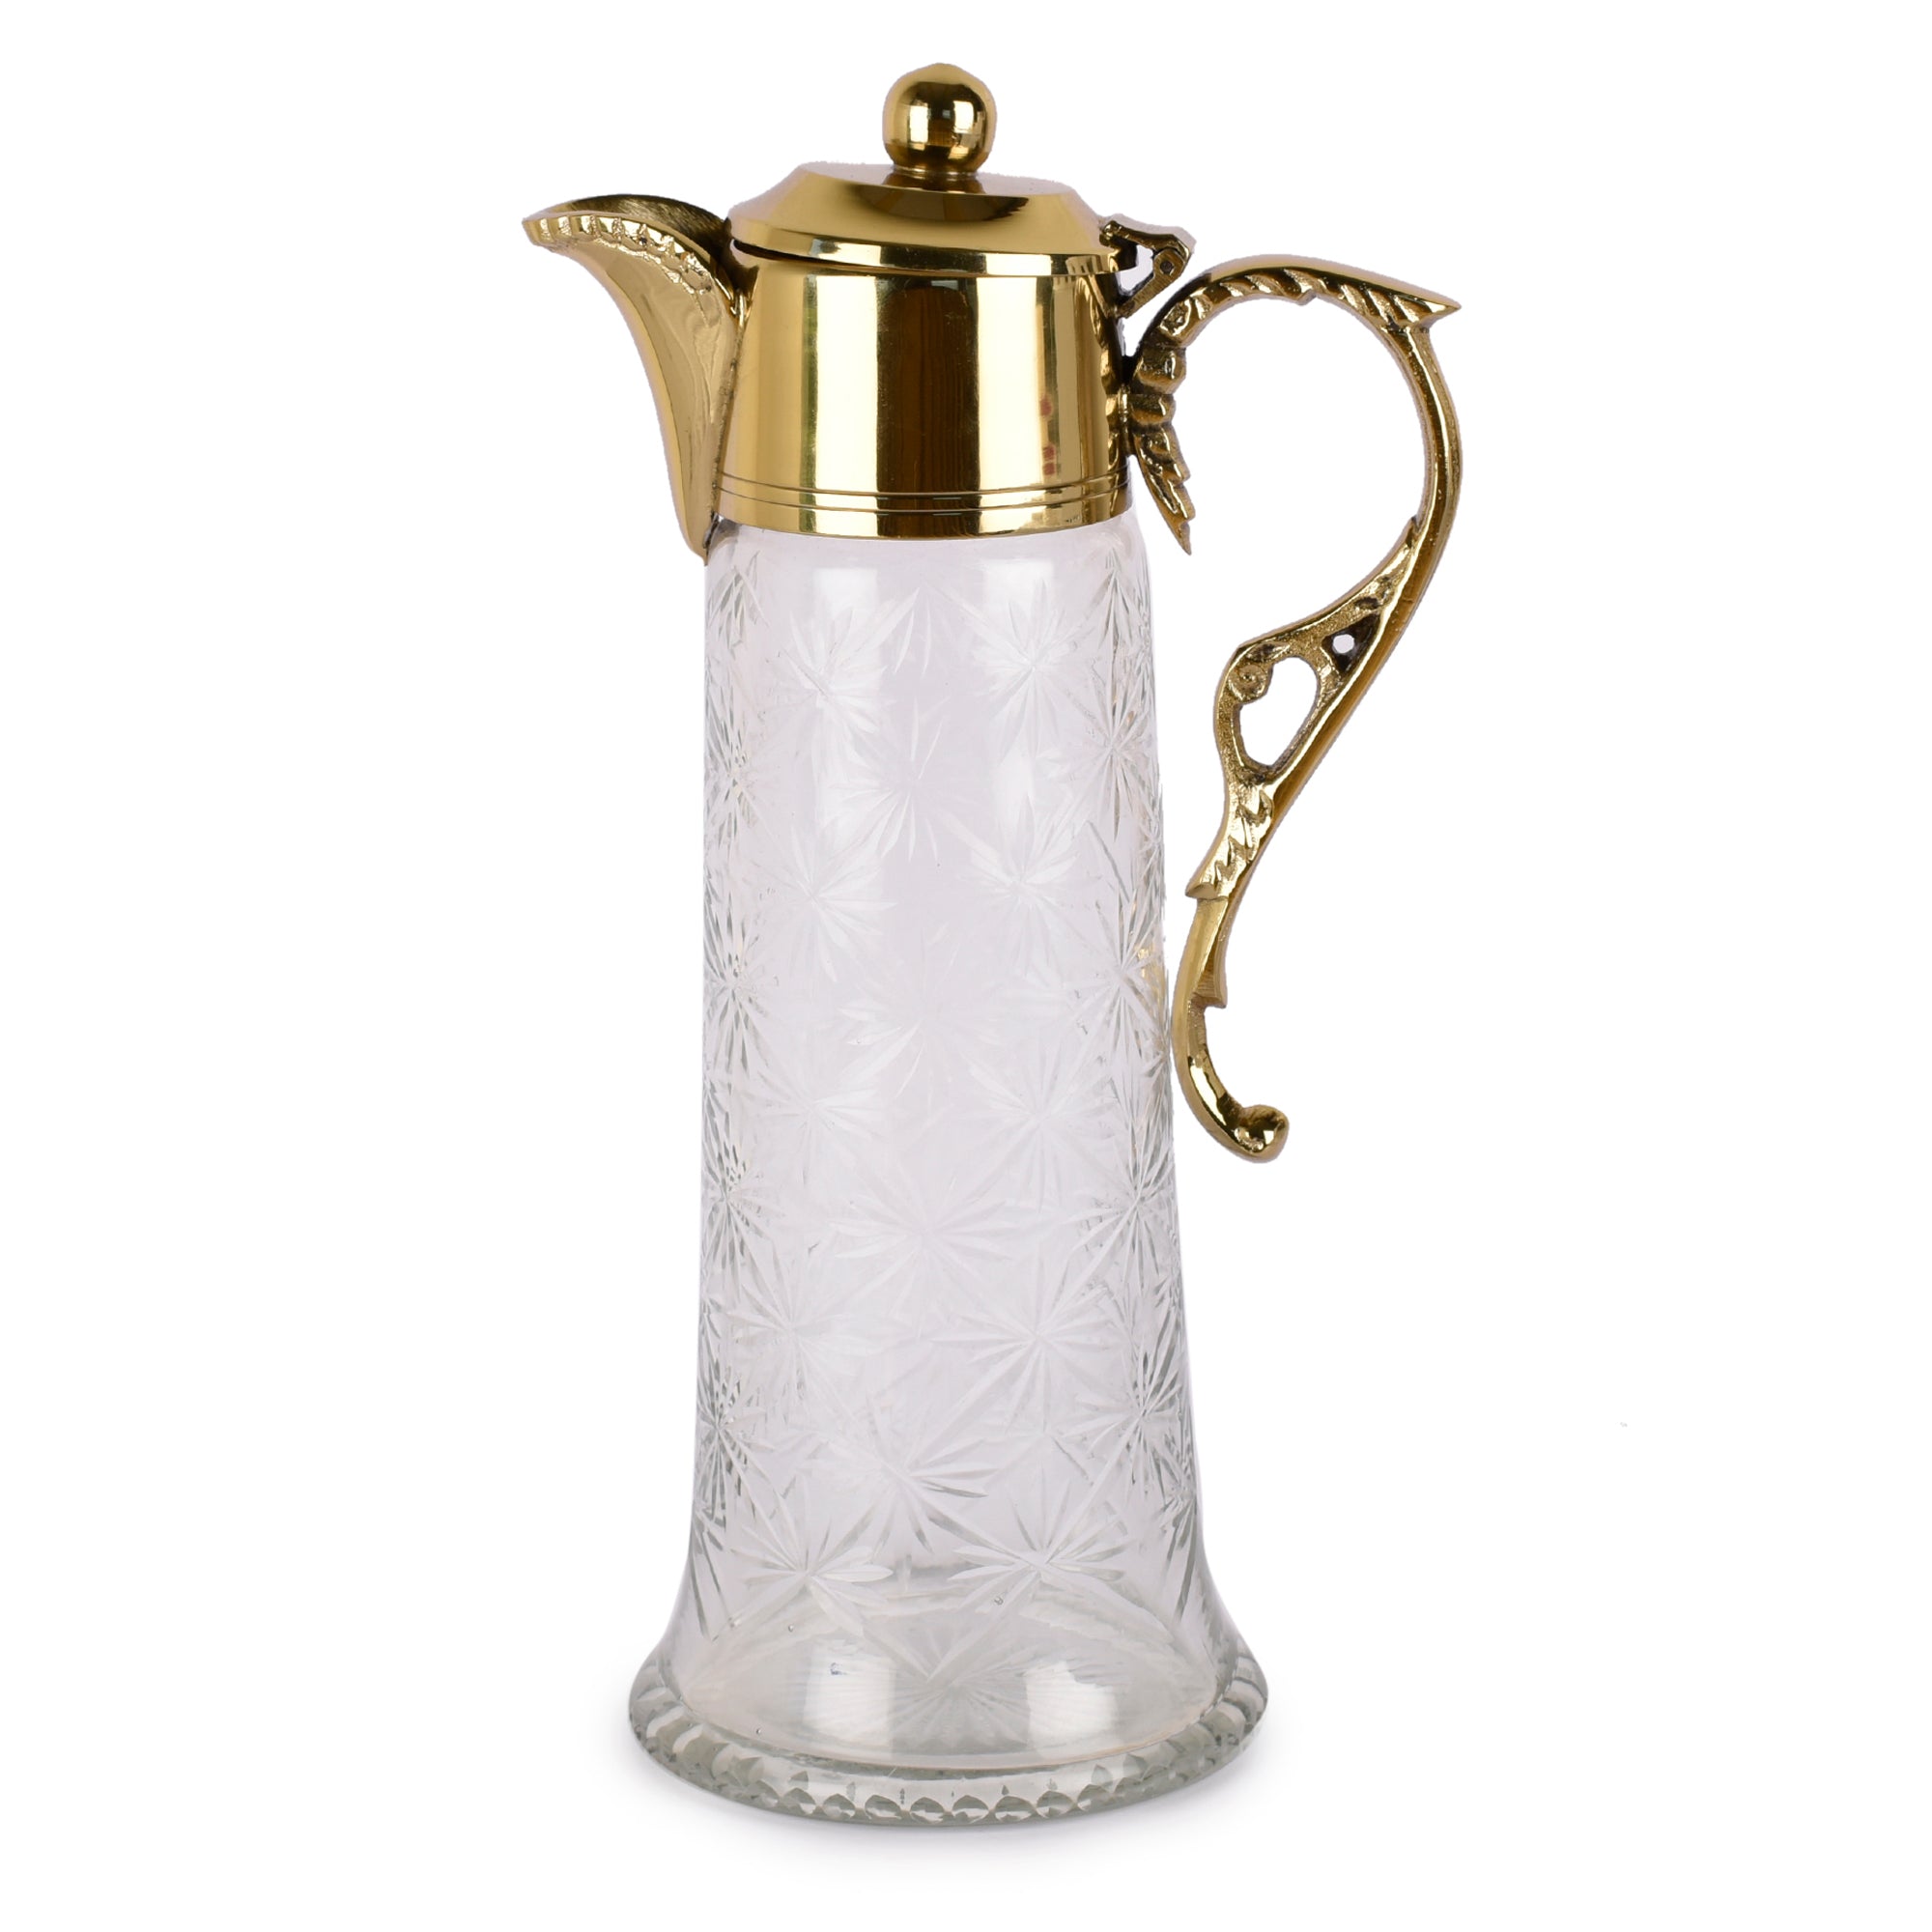 Neer Brass and Glass Jug - Gold Finish